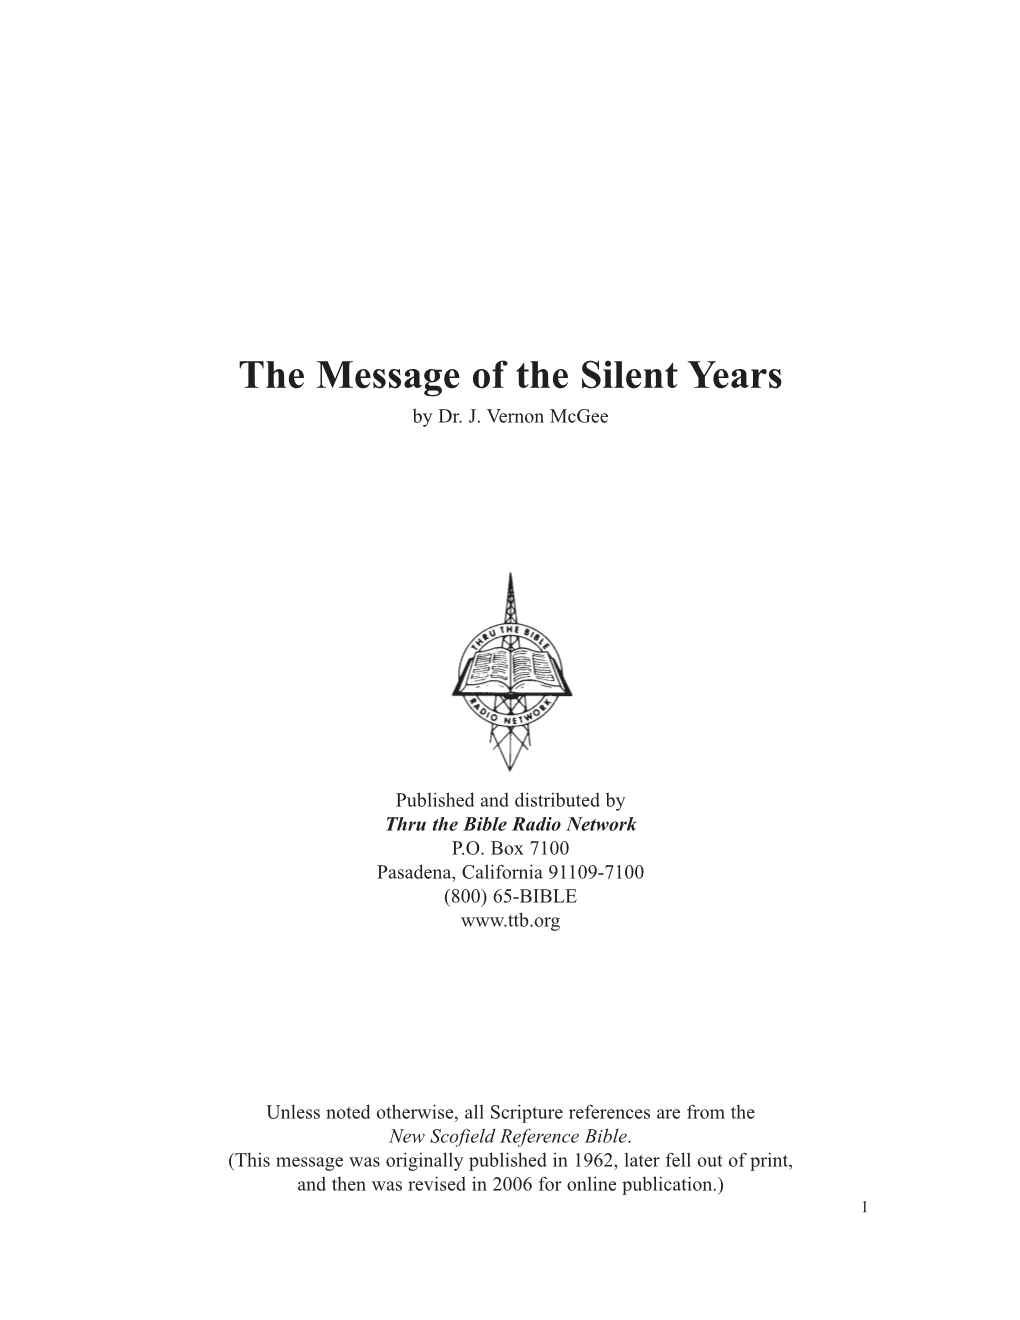 The Message of the Silent Years by Dr